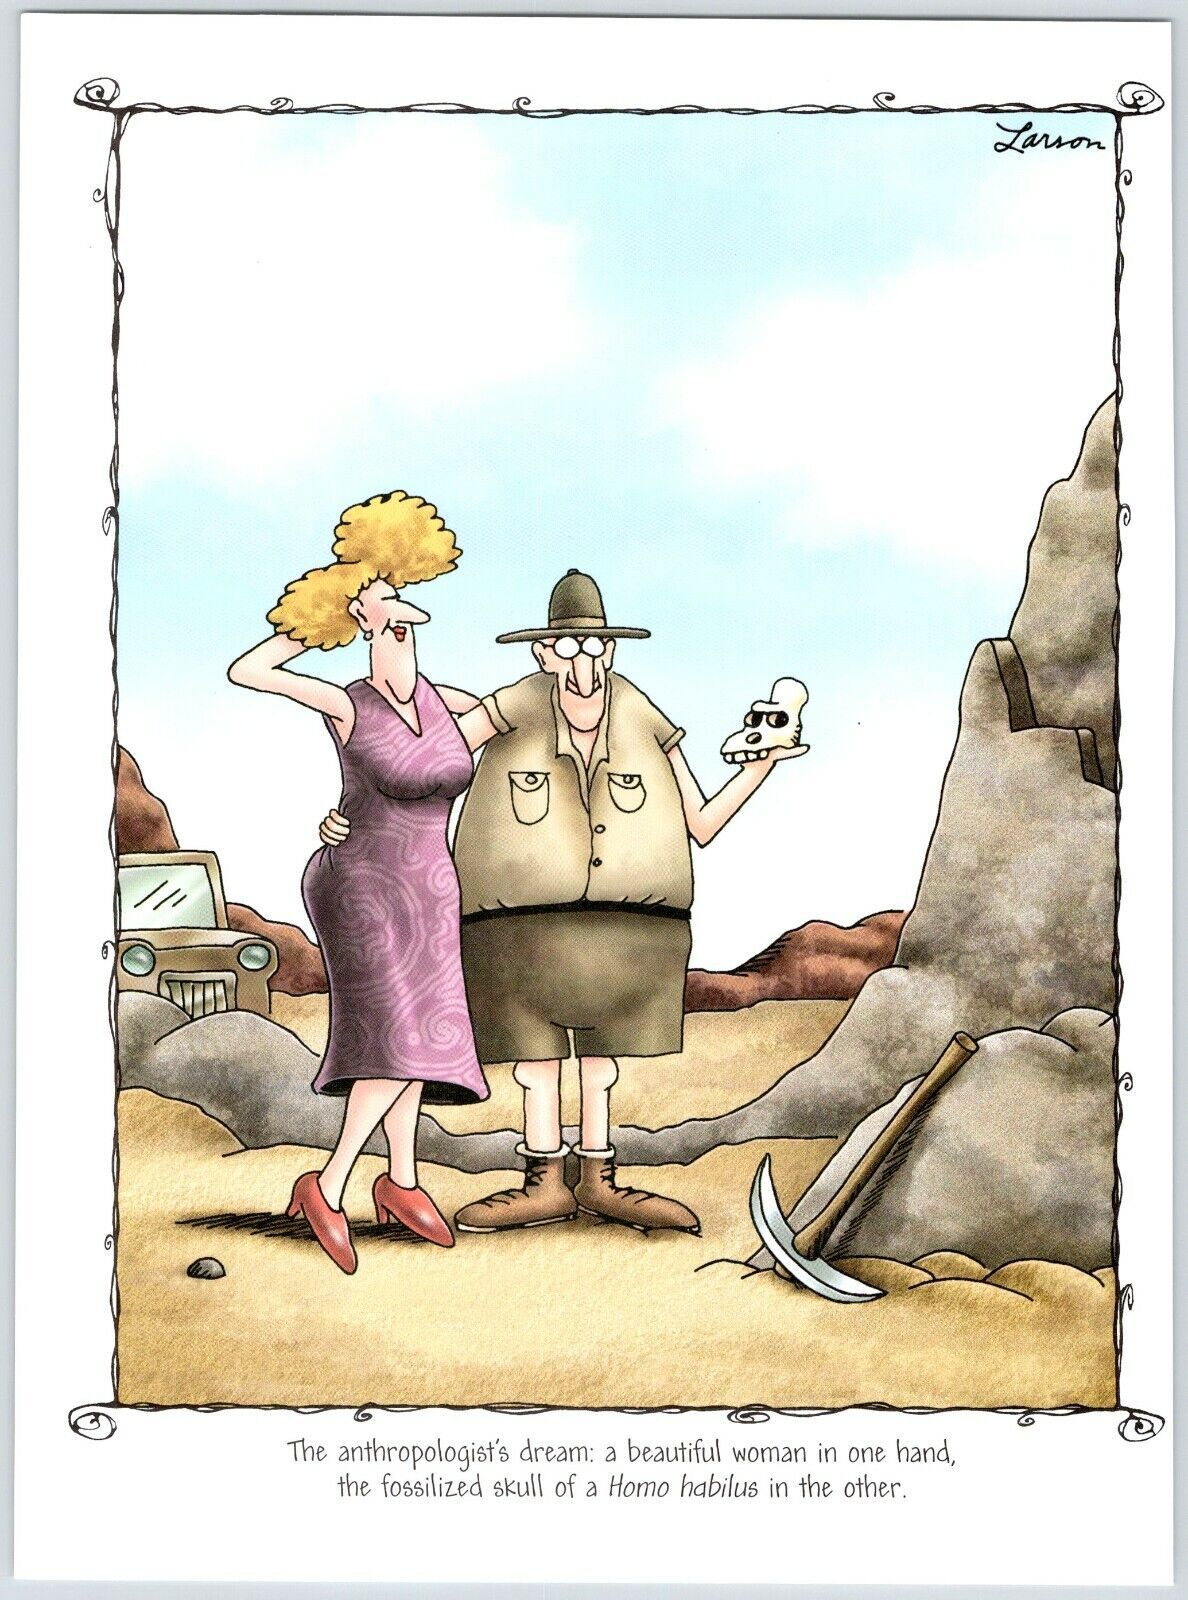 far side comic, title anthropologist's dream with a man standing with a skeleton head and a beautiful woman